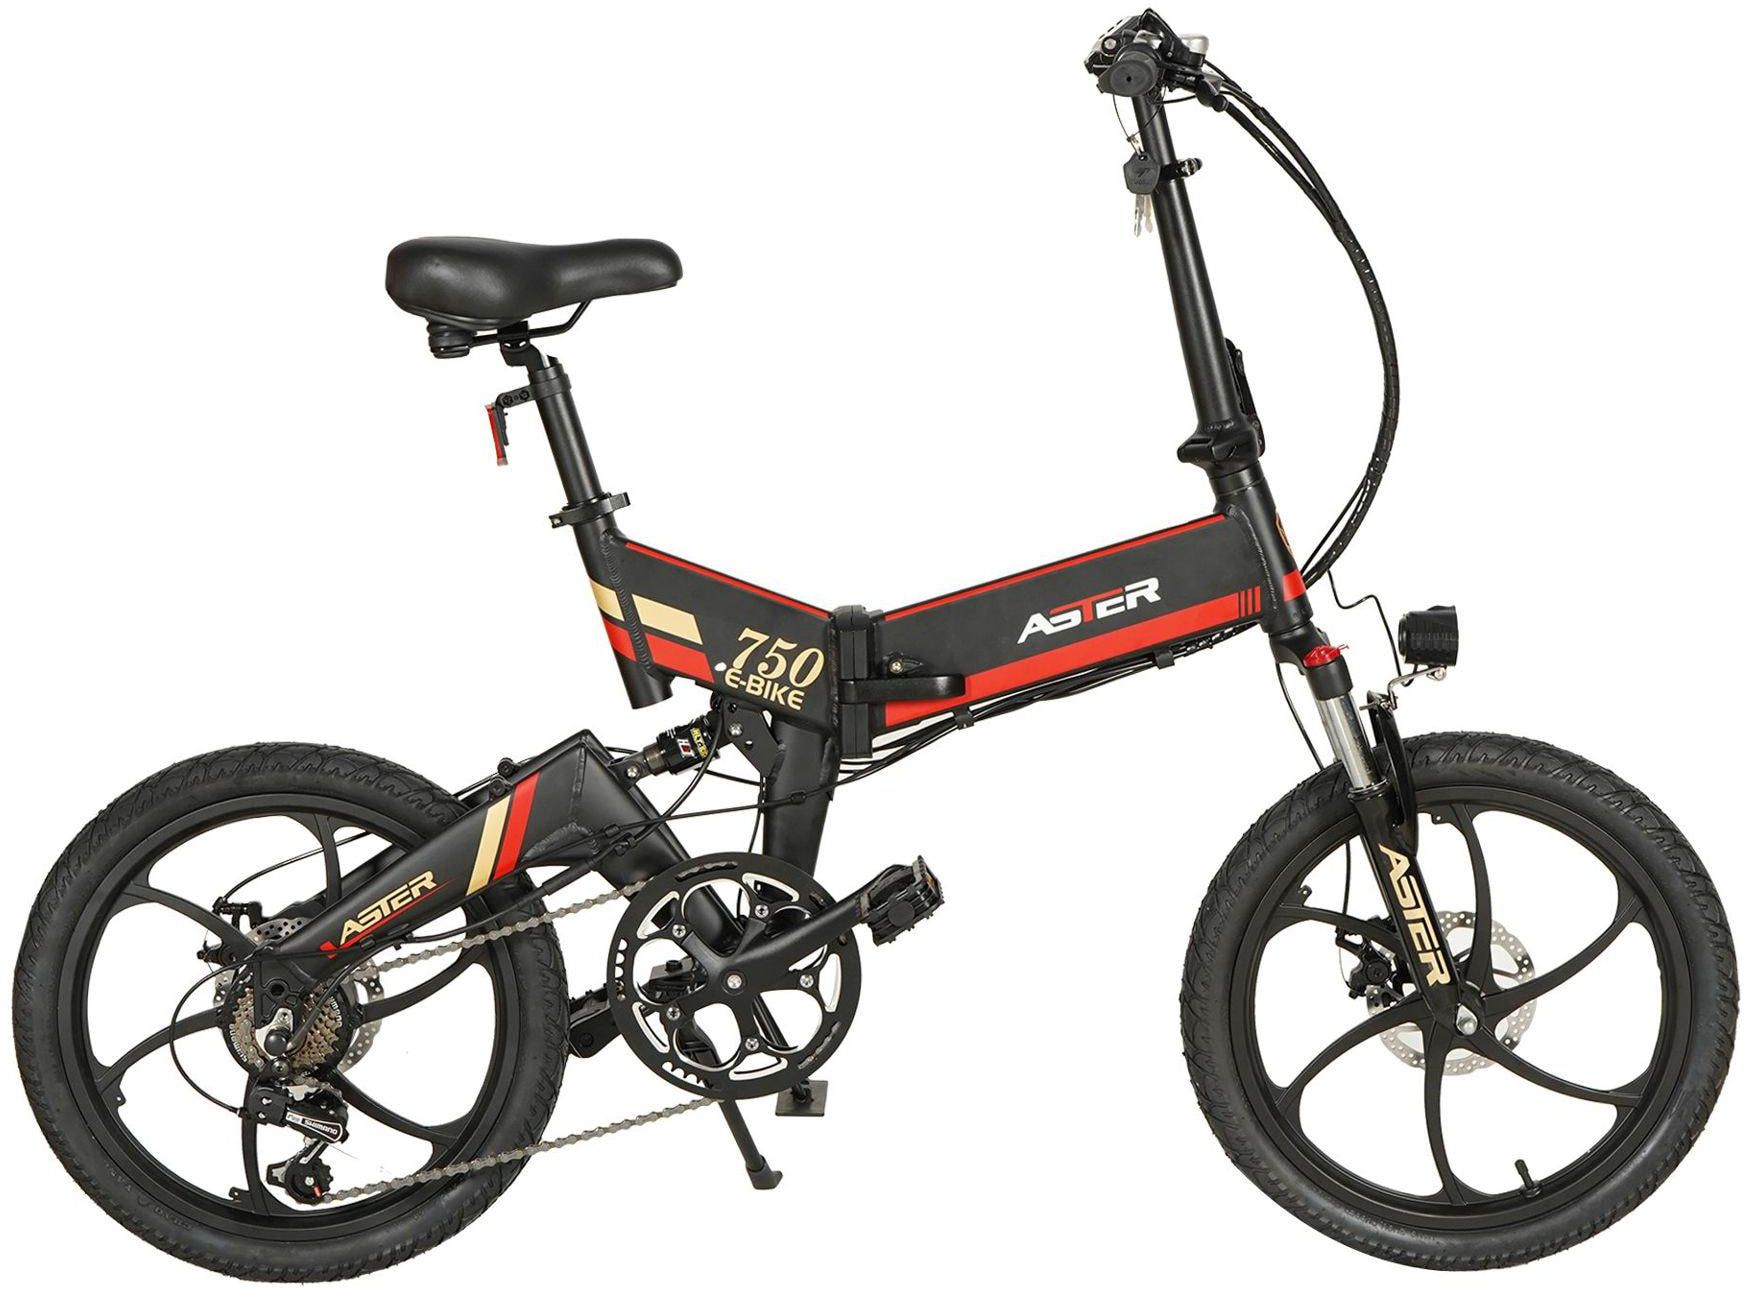 Aster Electric Multi-purpose Bicycle with 7 Gear, 20 Inch - Red & Black